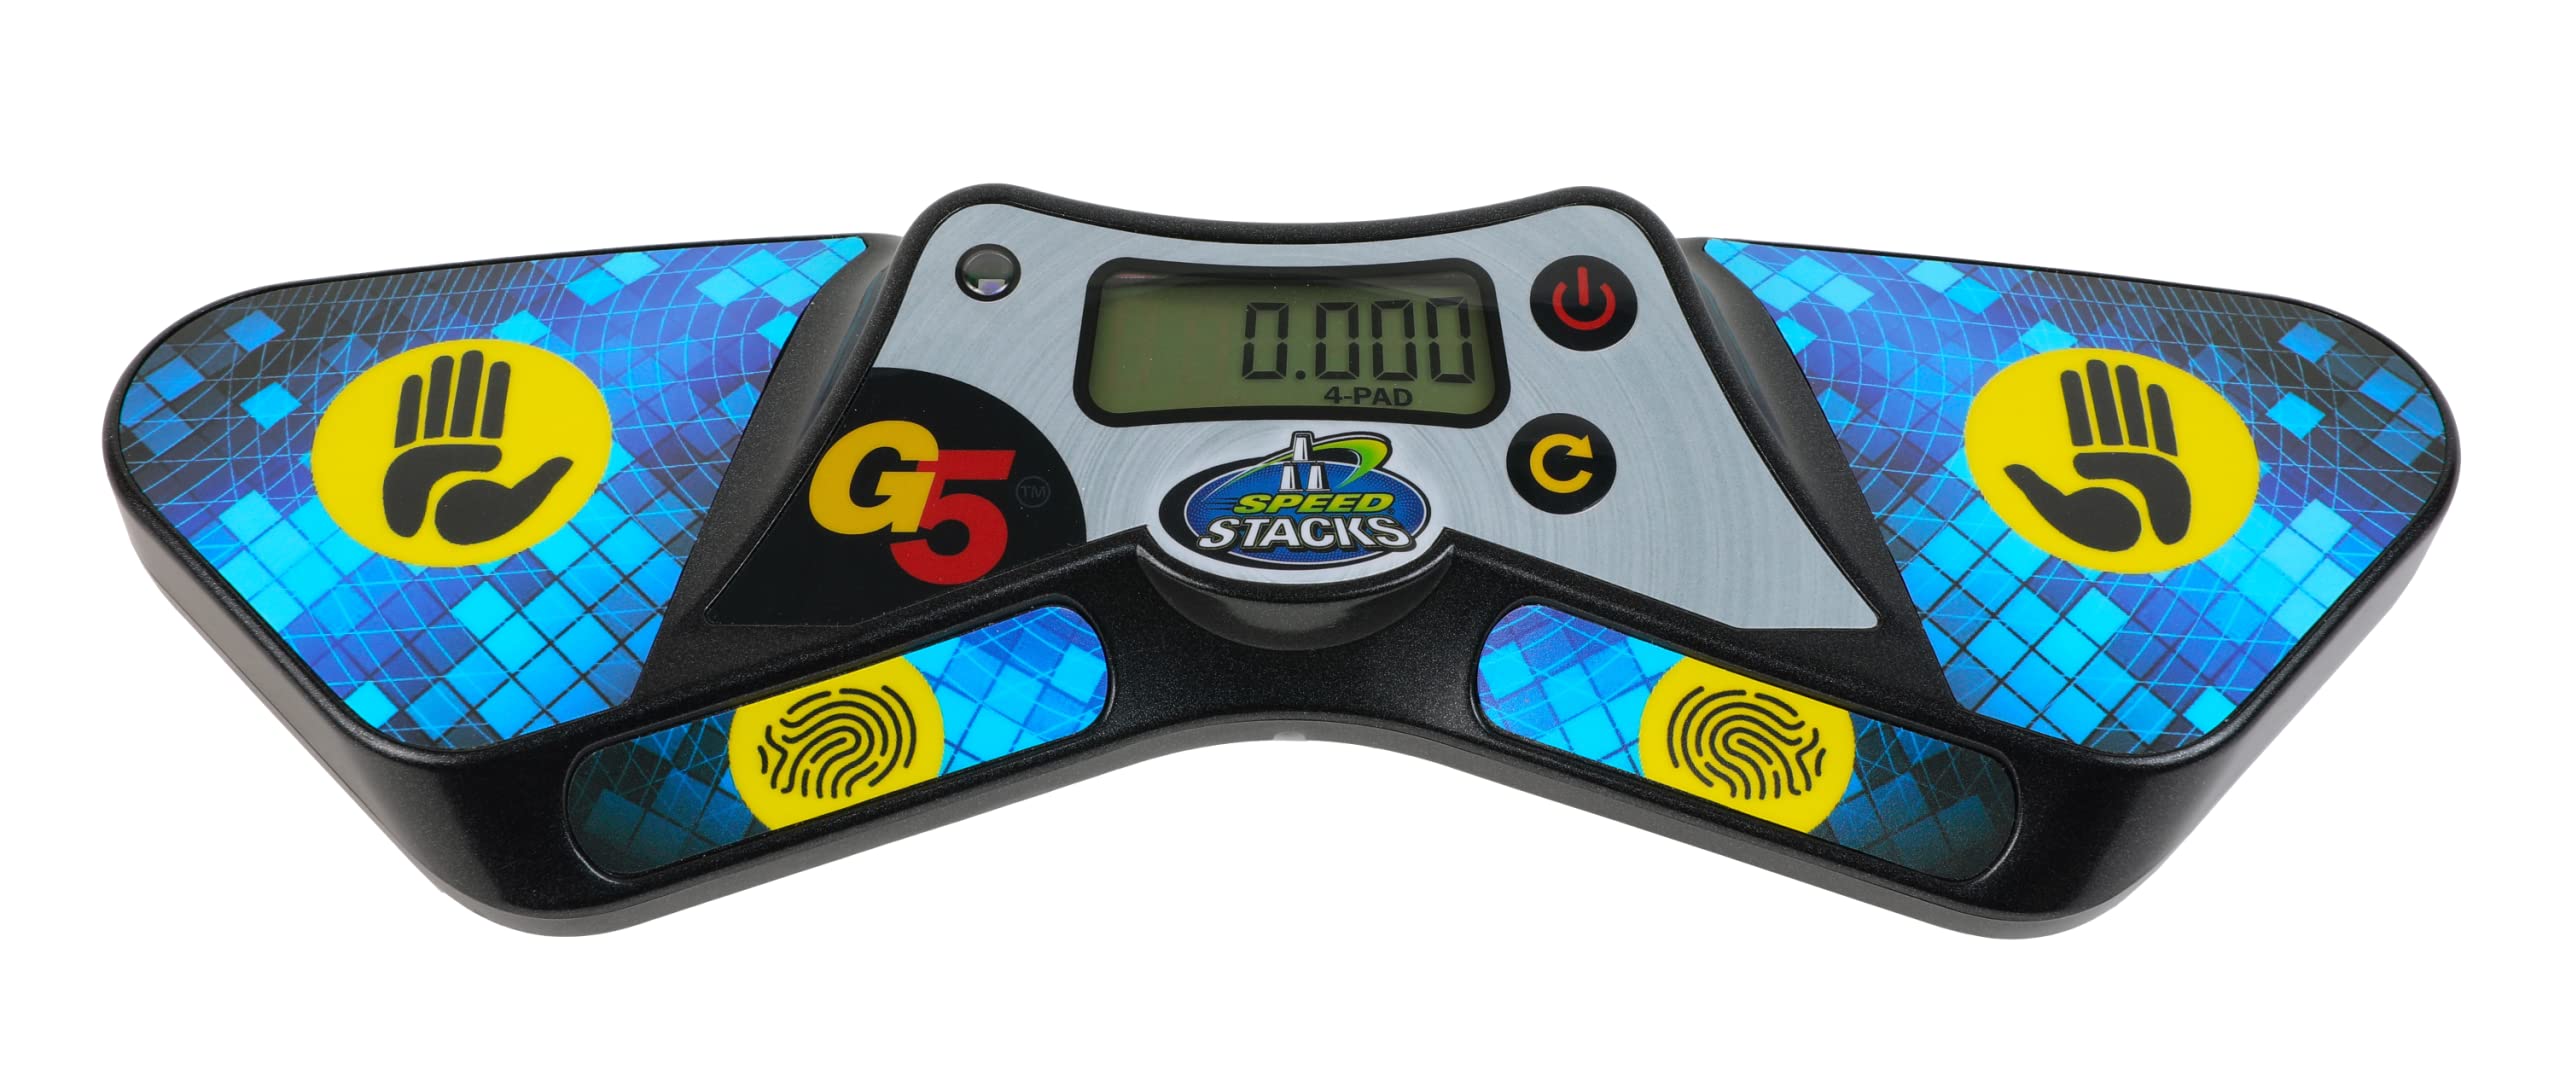 SpeedStacks G5 Timer | Endorsed by World Cube Association & Sport Stacking  association | Accuracy to 0.001 seconds